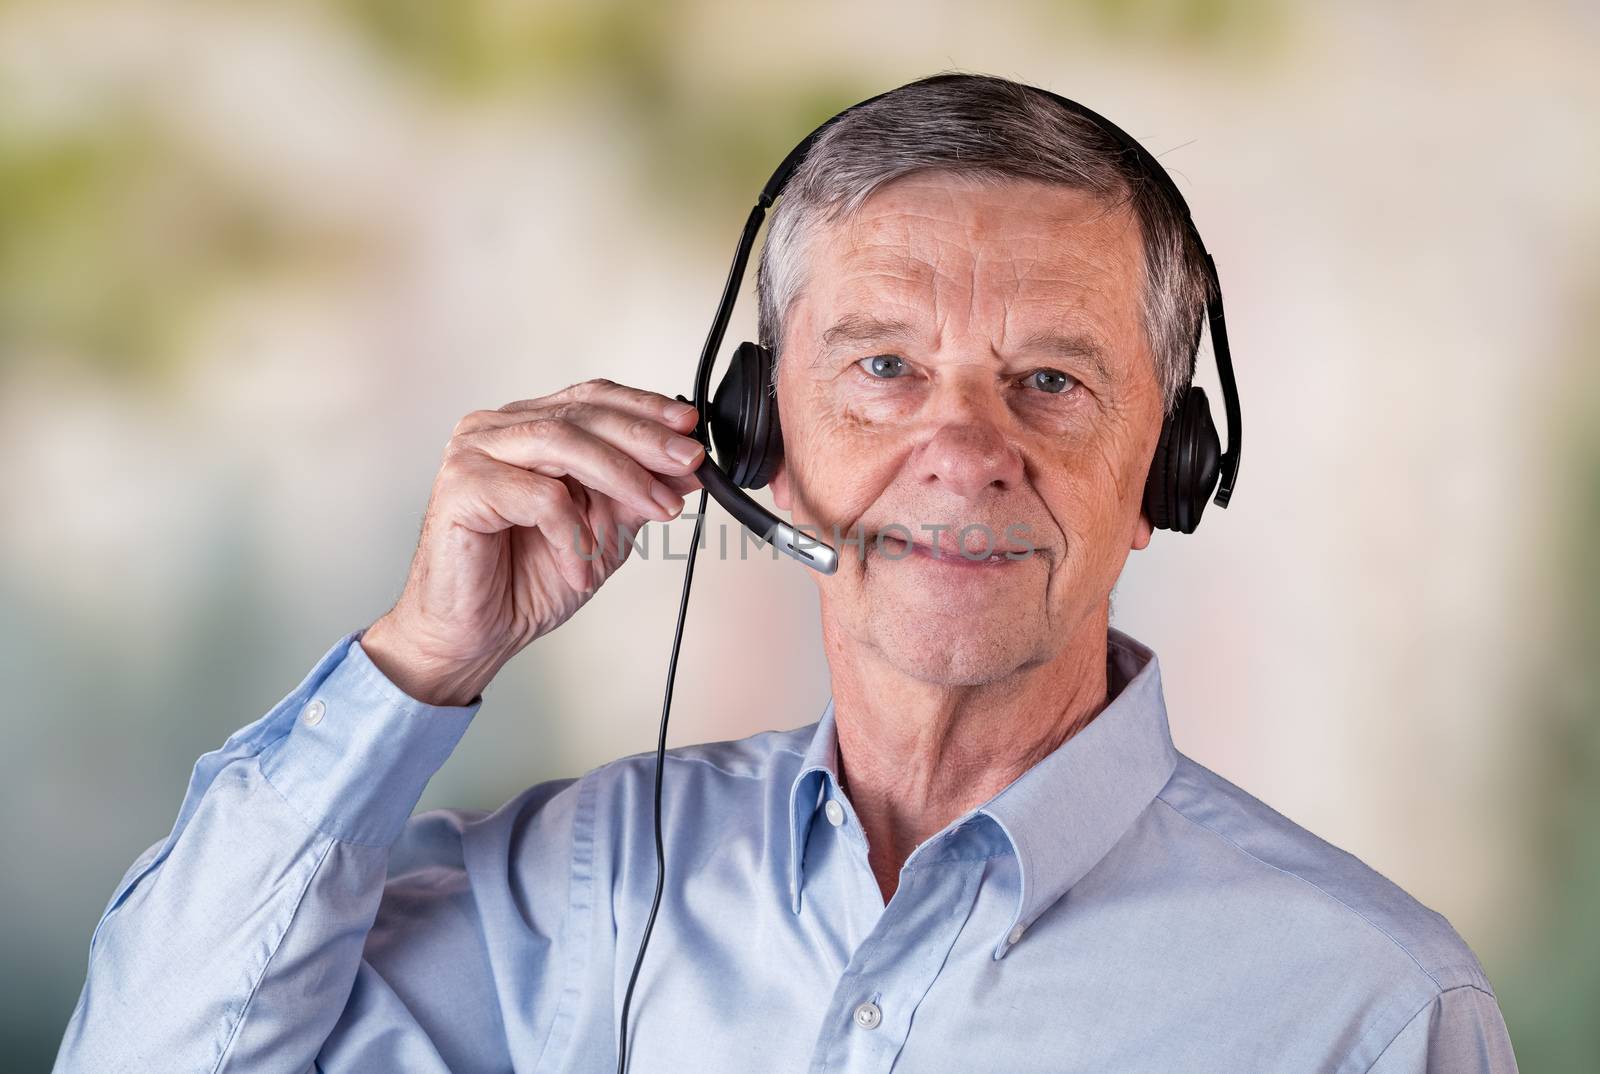 Senior man using headset to communicate with team or customers by steheap